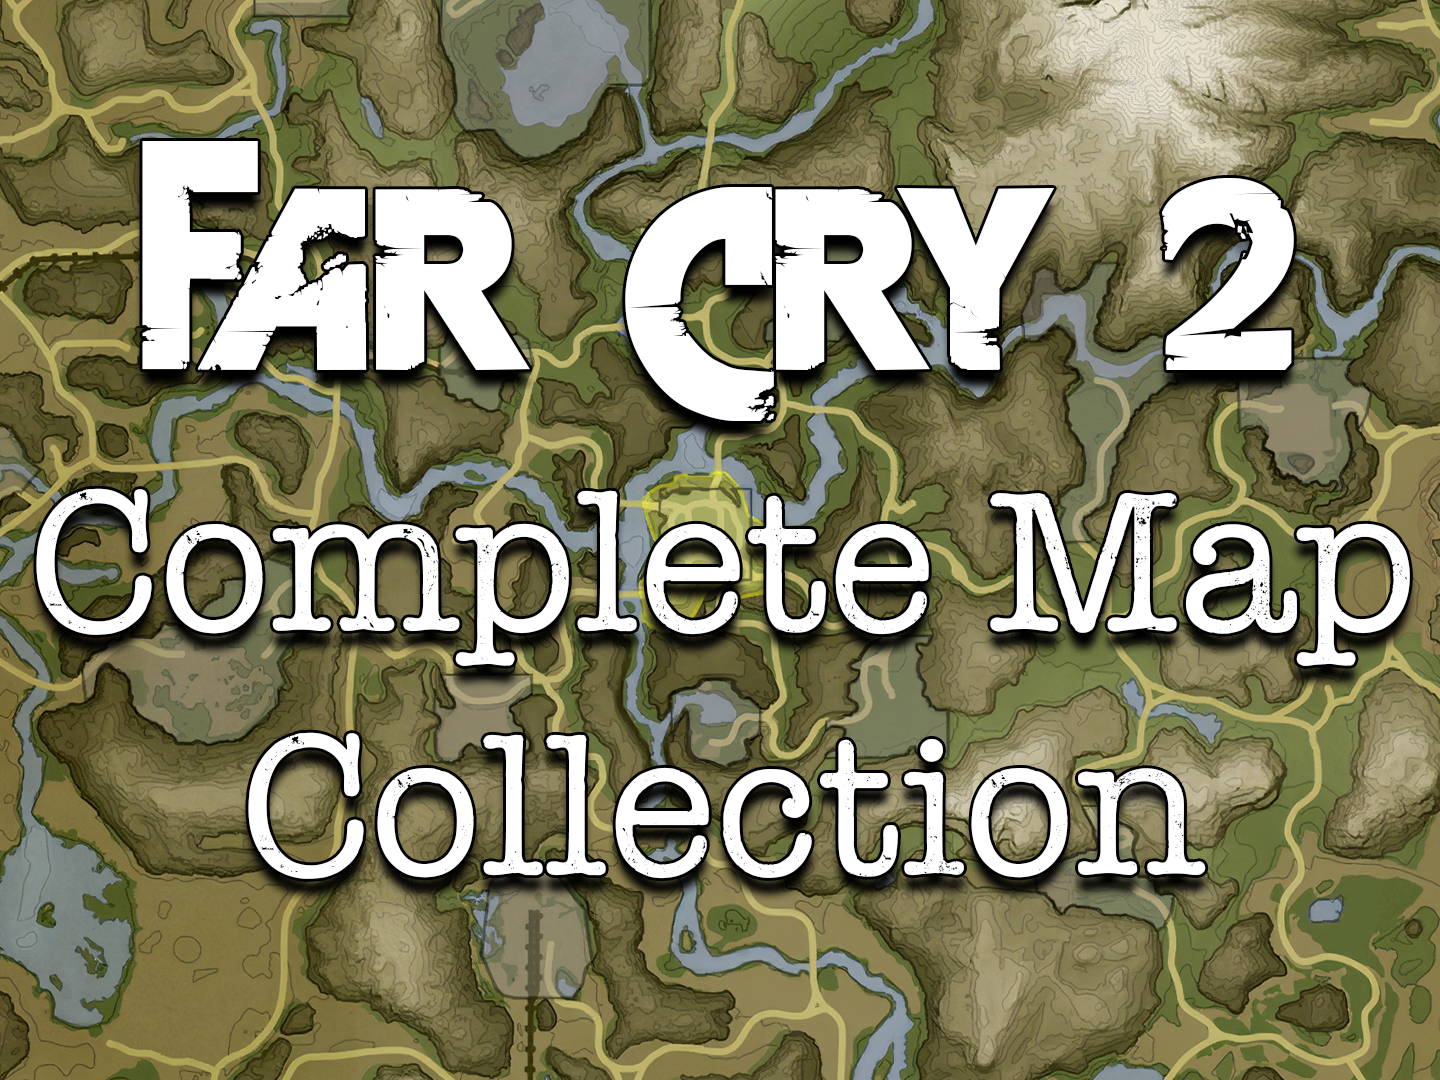 FAR CRY 2 - 1st UFLL MISSION MAPS - MAP 6 